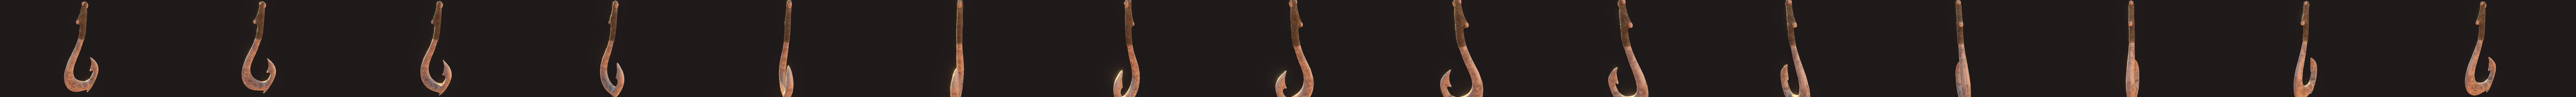 3D Print of Maui's magical fish hook from the movie Moana by liftbag